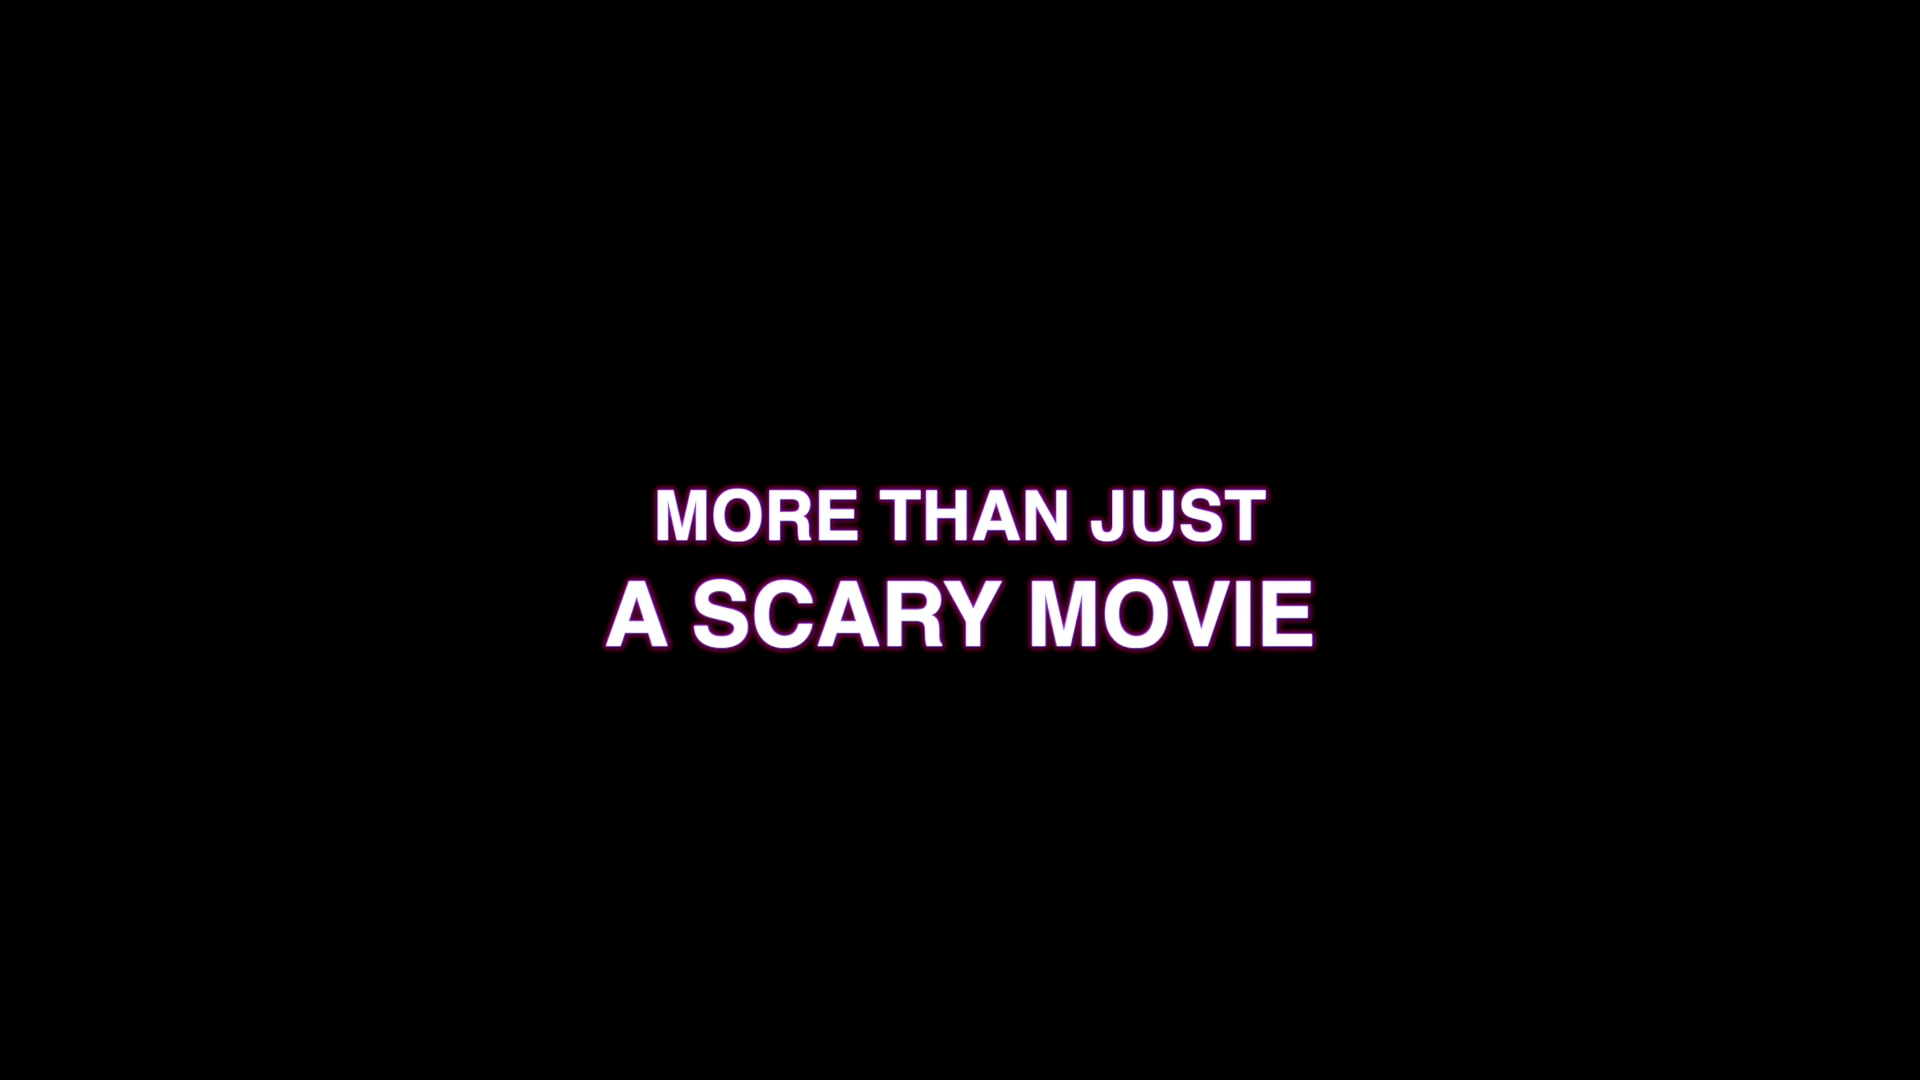 More Than Just a Scary Movie